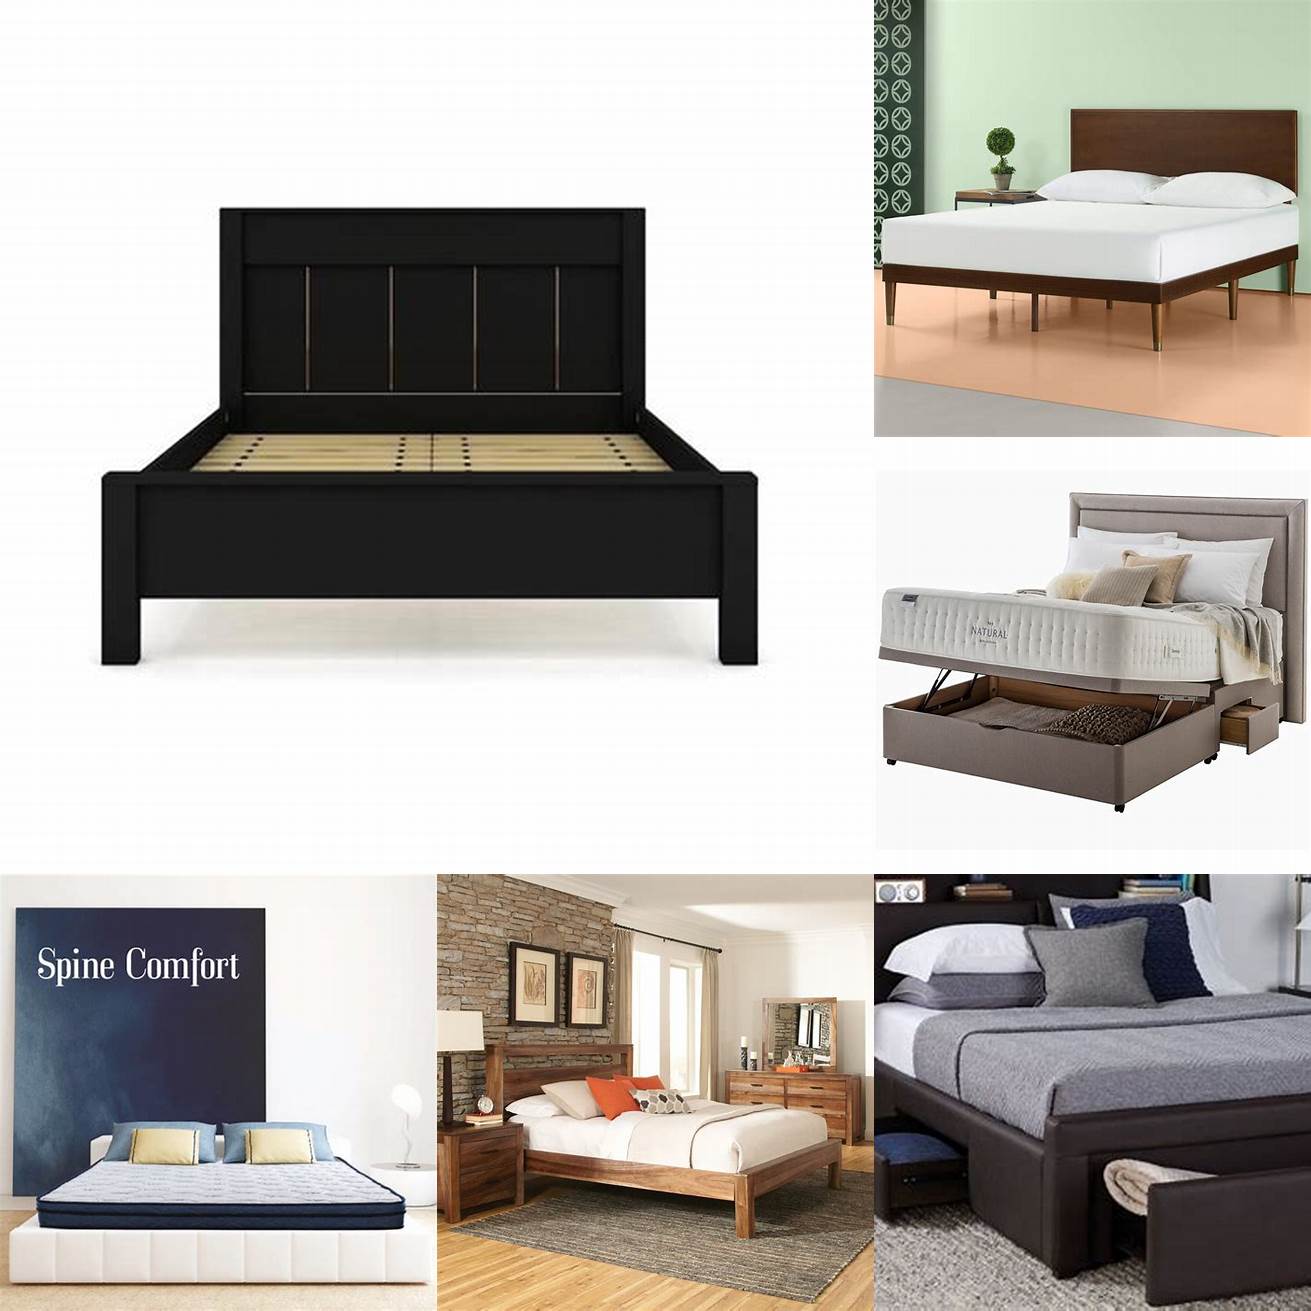 Comfort Platform beds offer excellent support and comfort for your body and spine